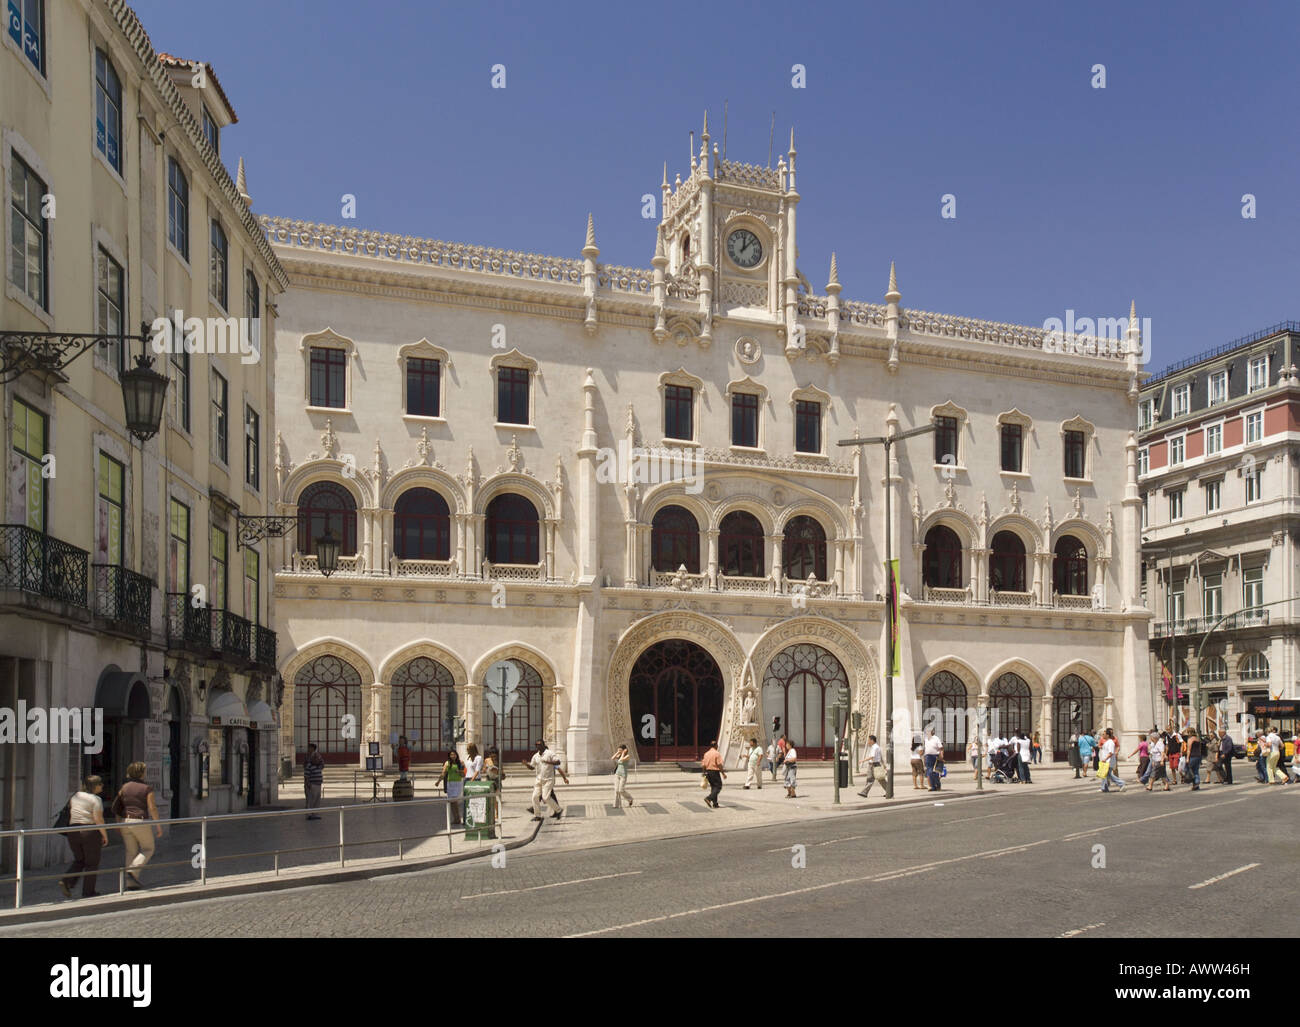 Portugal Lisbon, Rossio railway station facade, a neo manueline style building in the Baixa district, the city centre Stock Photo